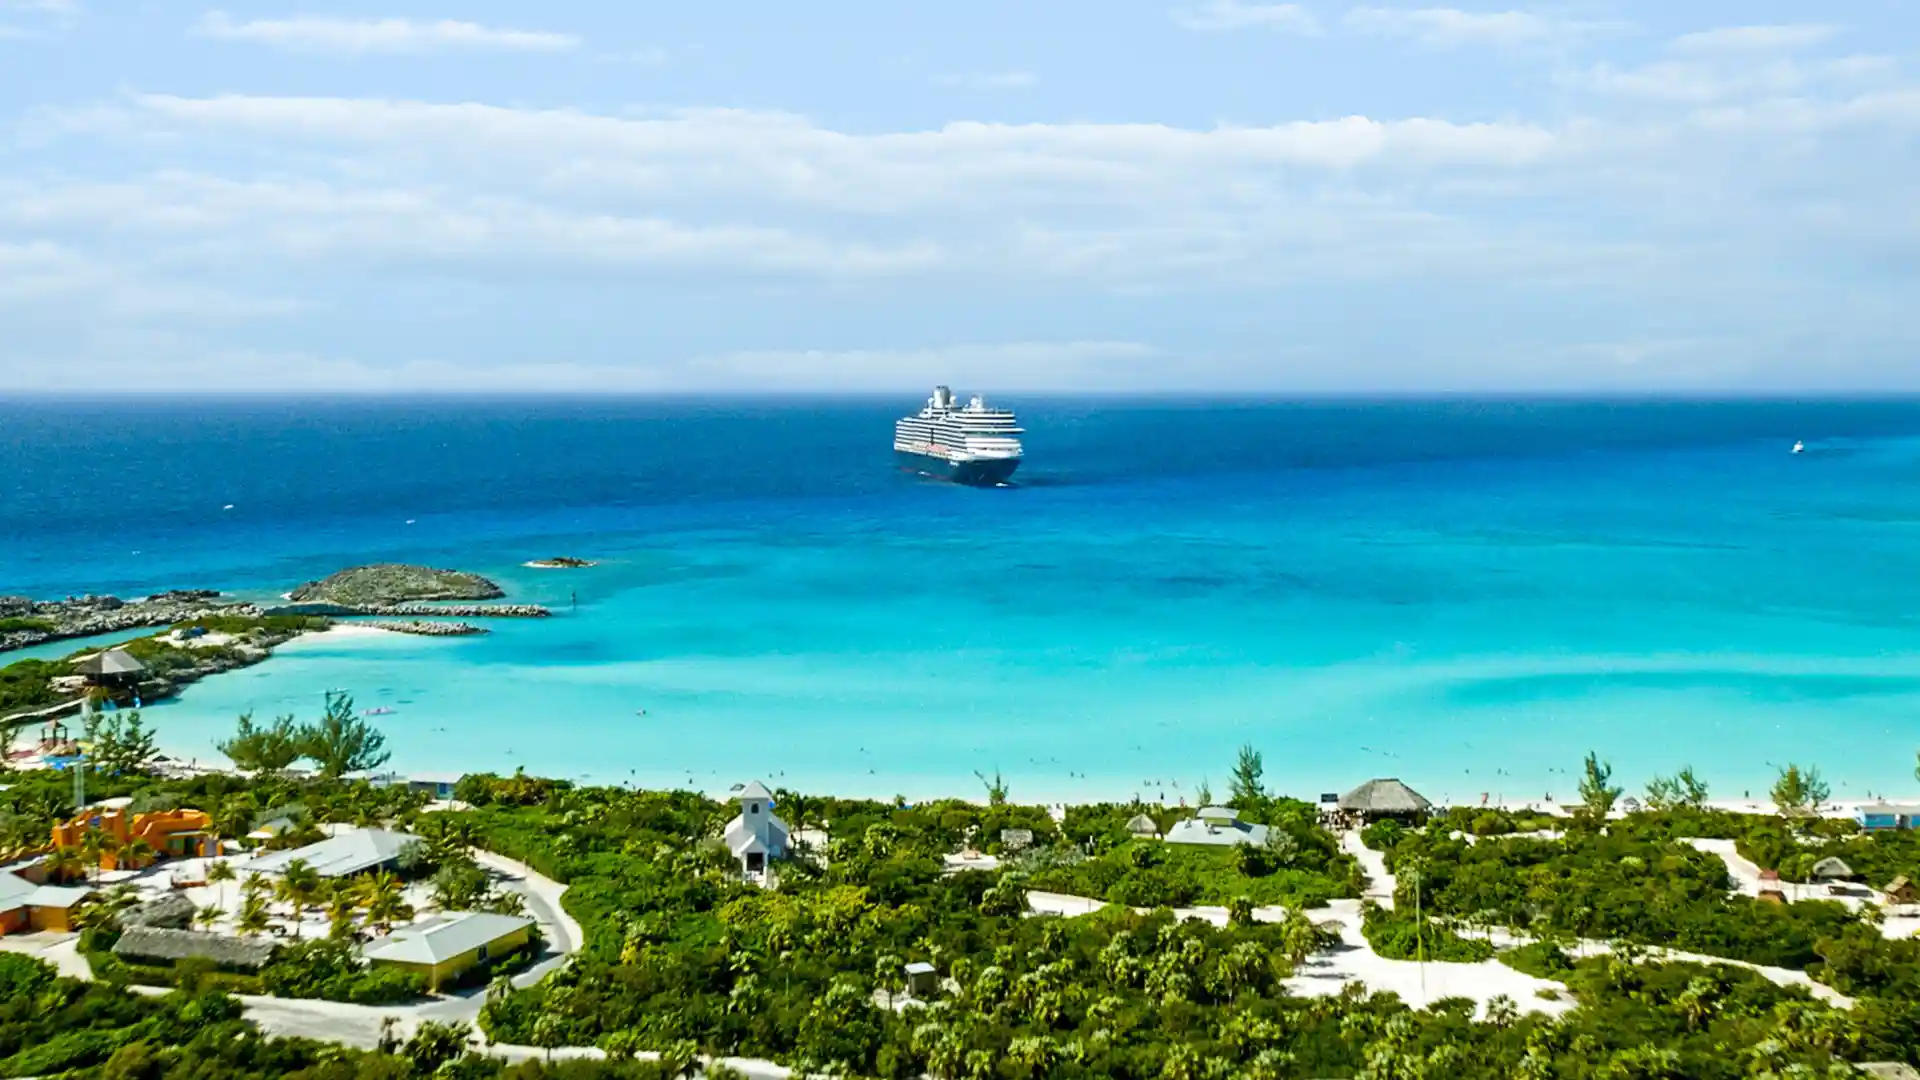 View of Half Moon Cay, Holland America's award-winning private island in the Bahamas.